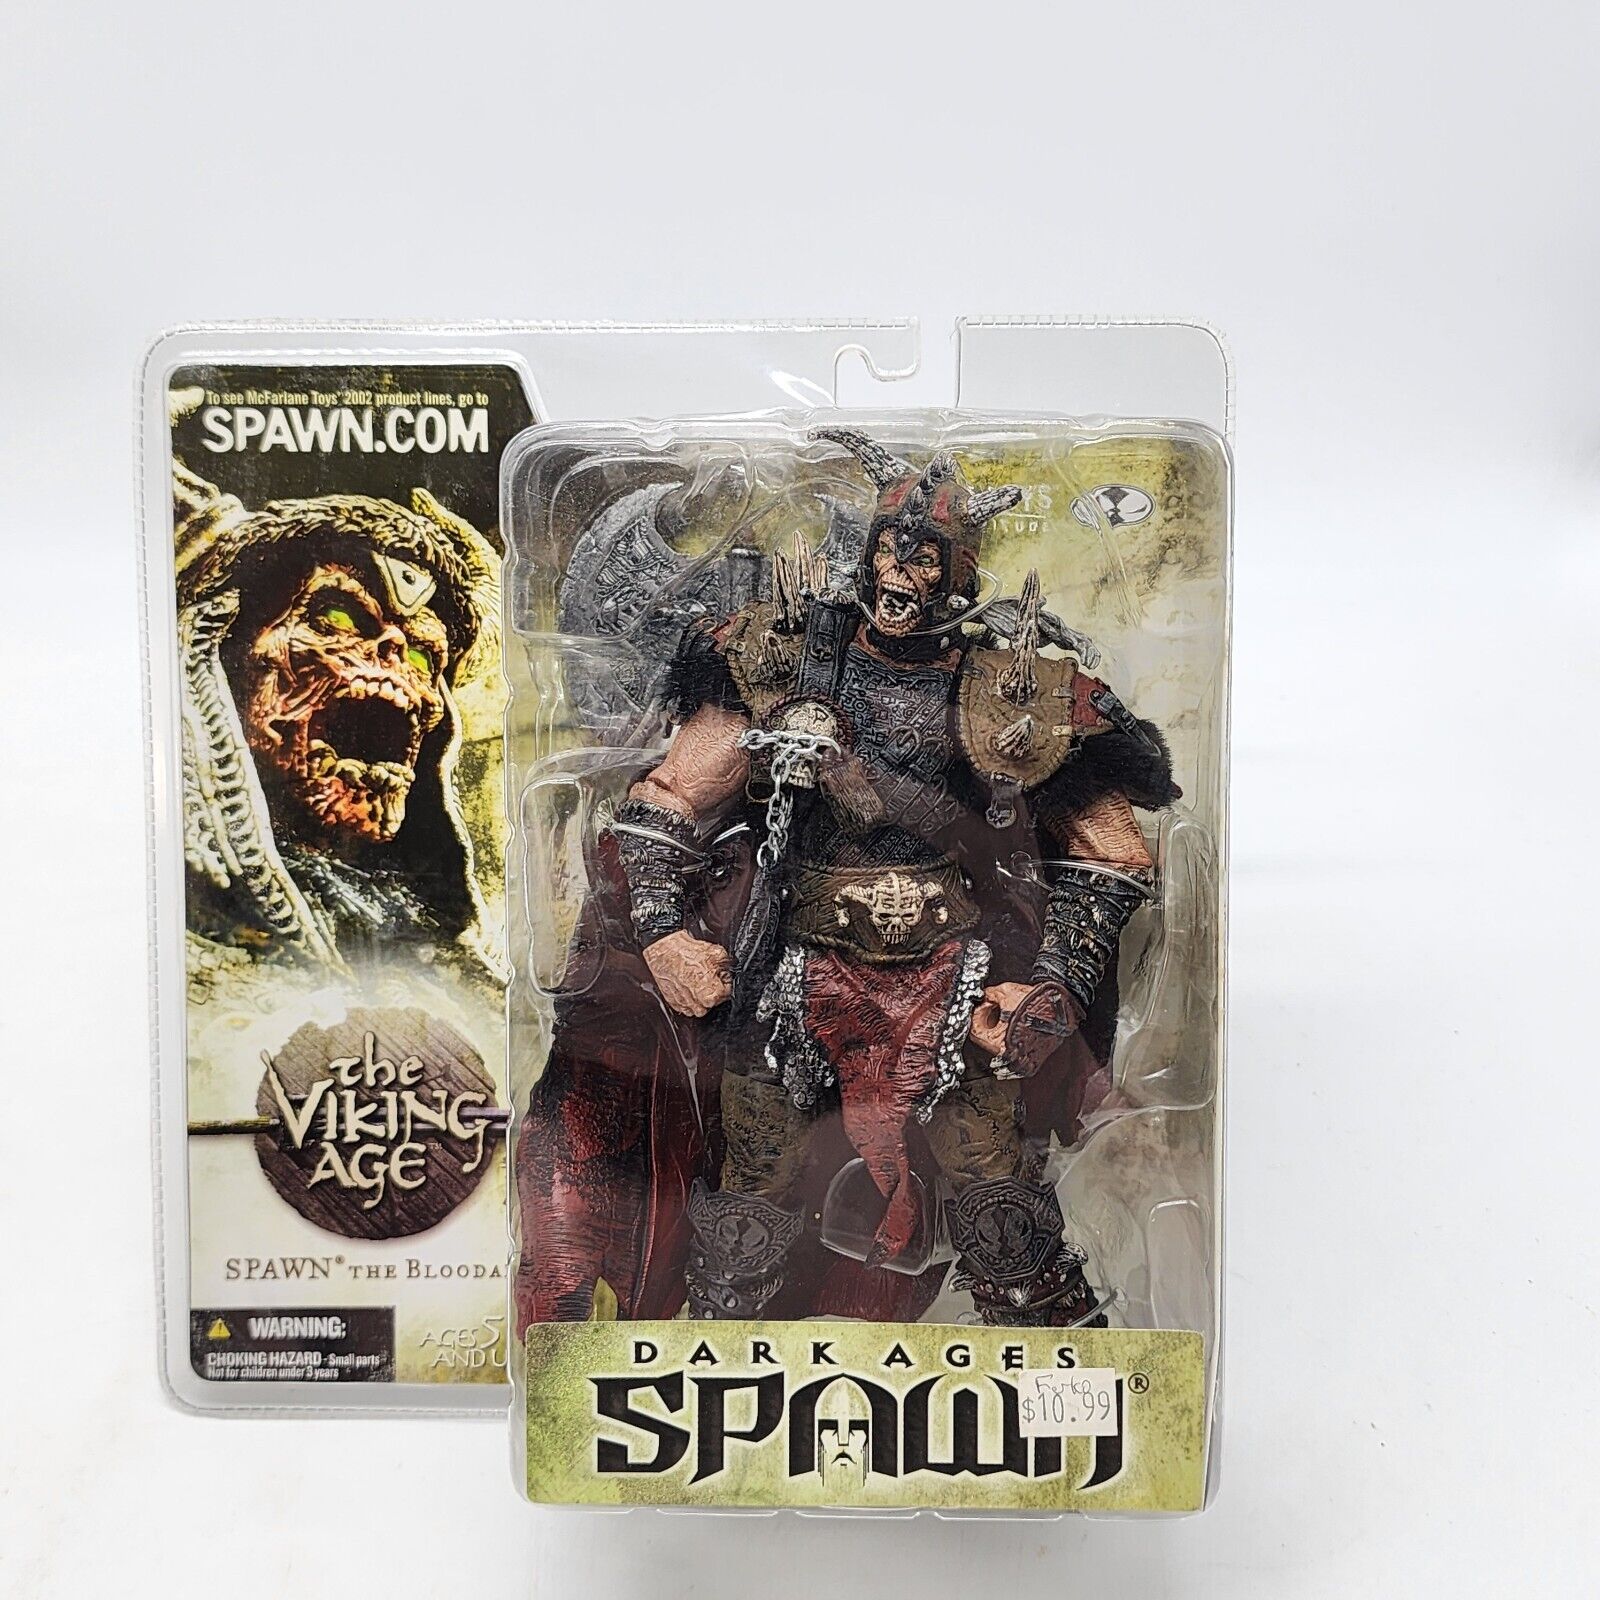 Magnificent McFarlane Toys Dark Ages Spawn The Viking Age Series 22 Spawn the Bloodaxe NEW on eBay